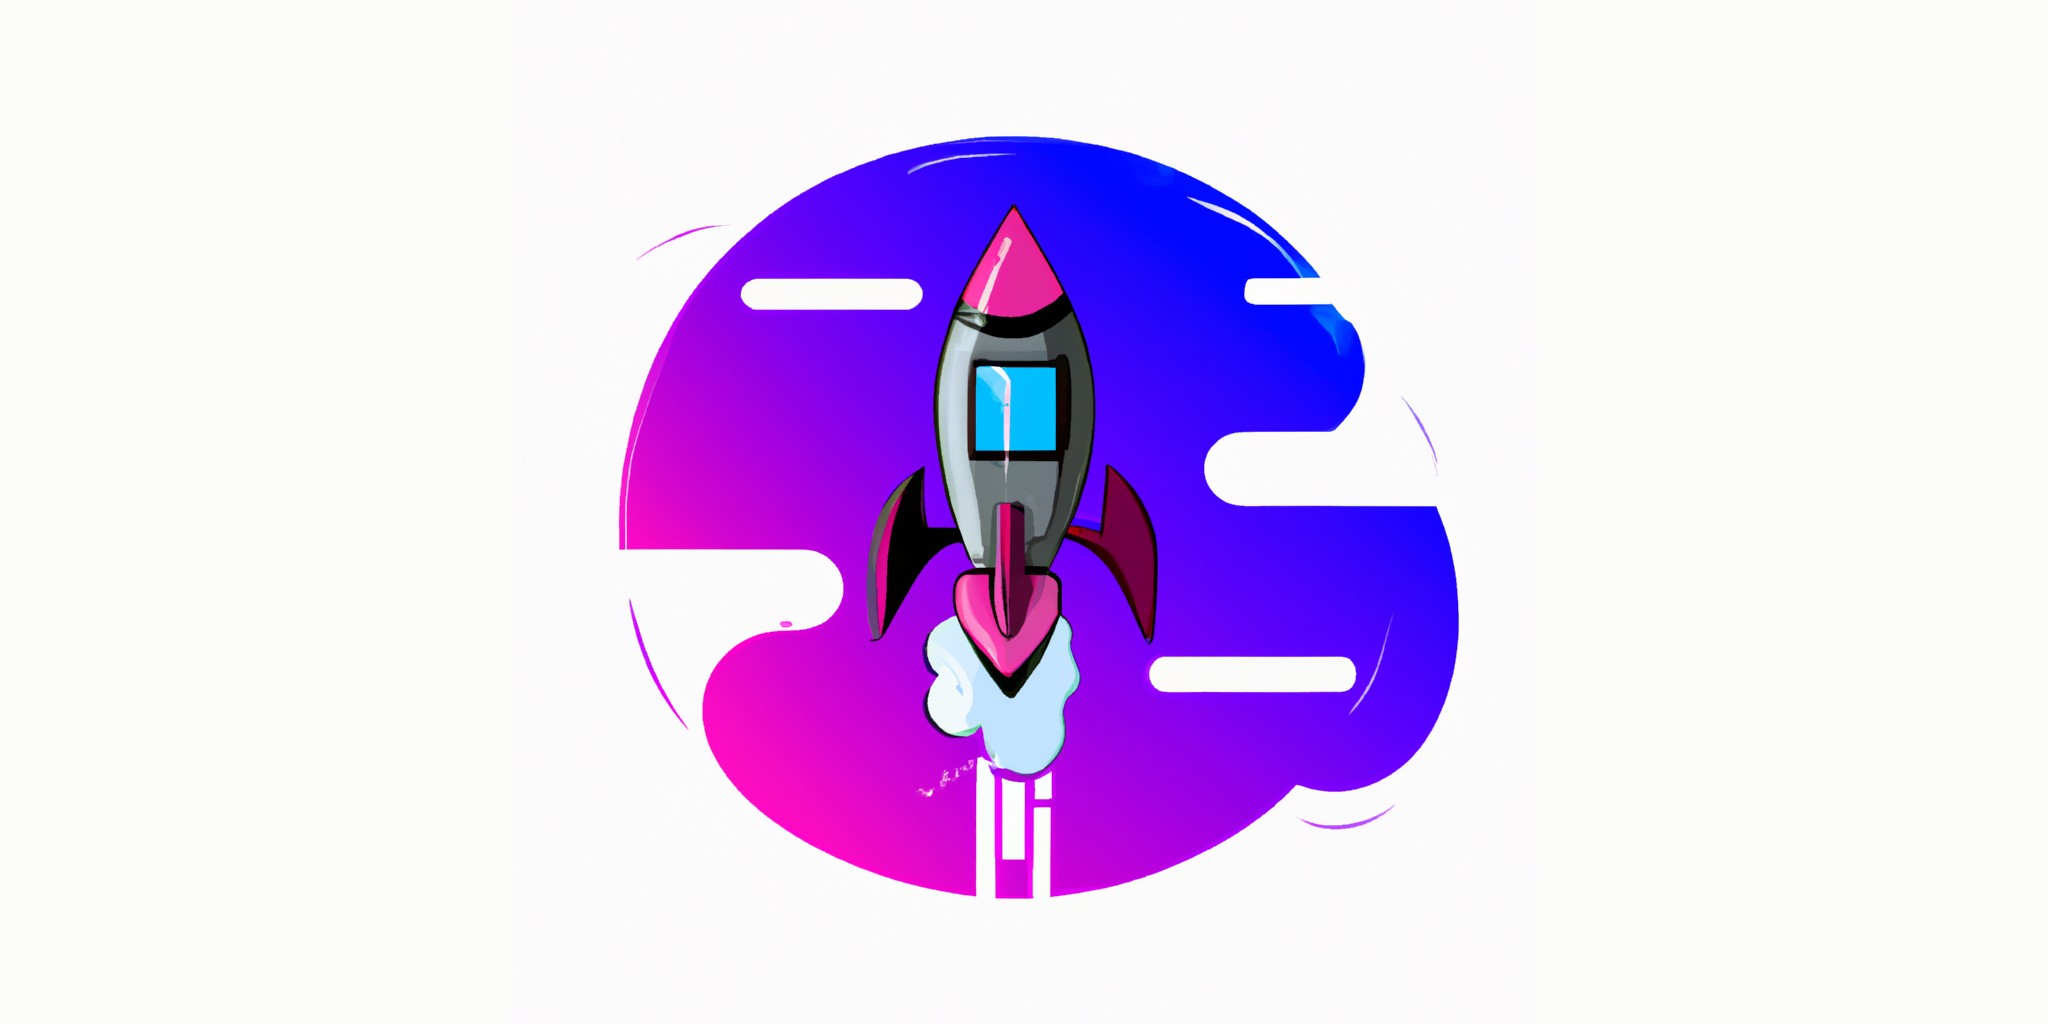 a rocket in flat illustration style with gradients and white background